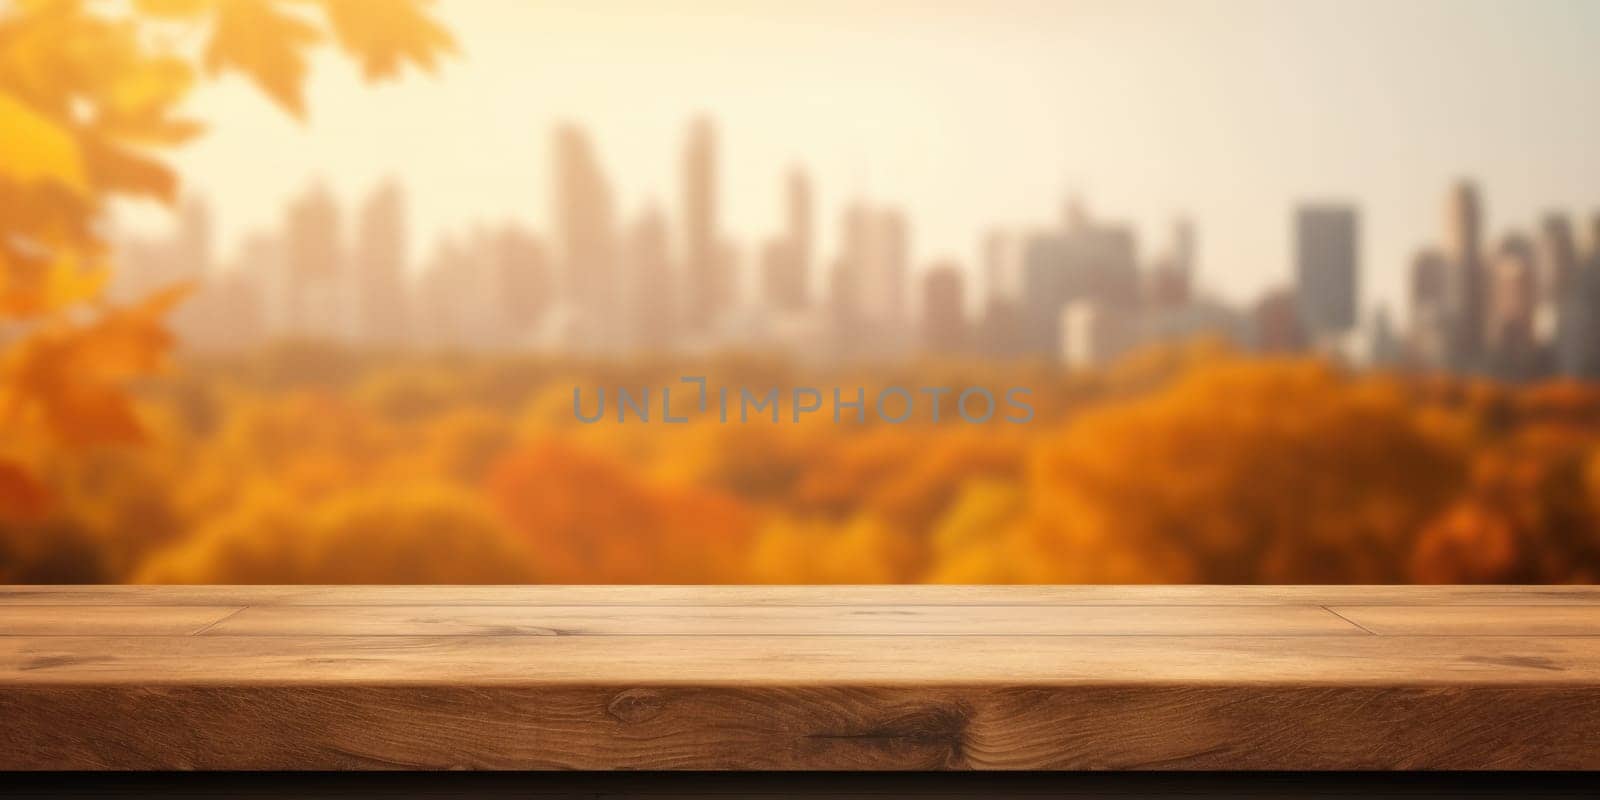 The empty wooden table top with blur background of nature skyline in autumn. Exuberant image.